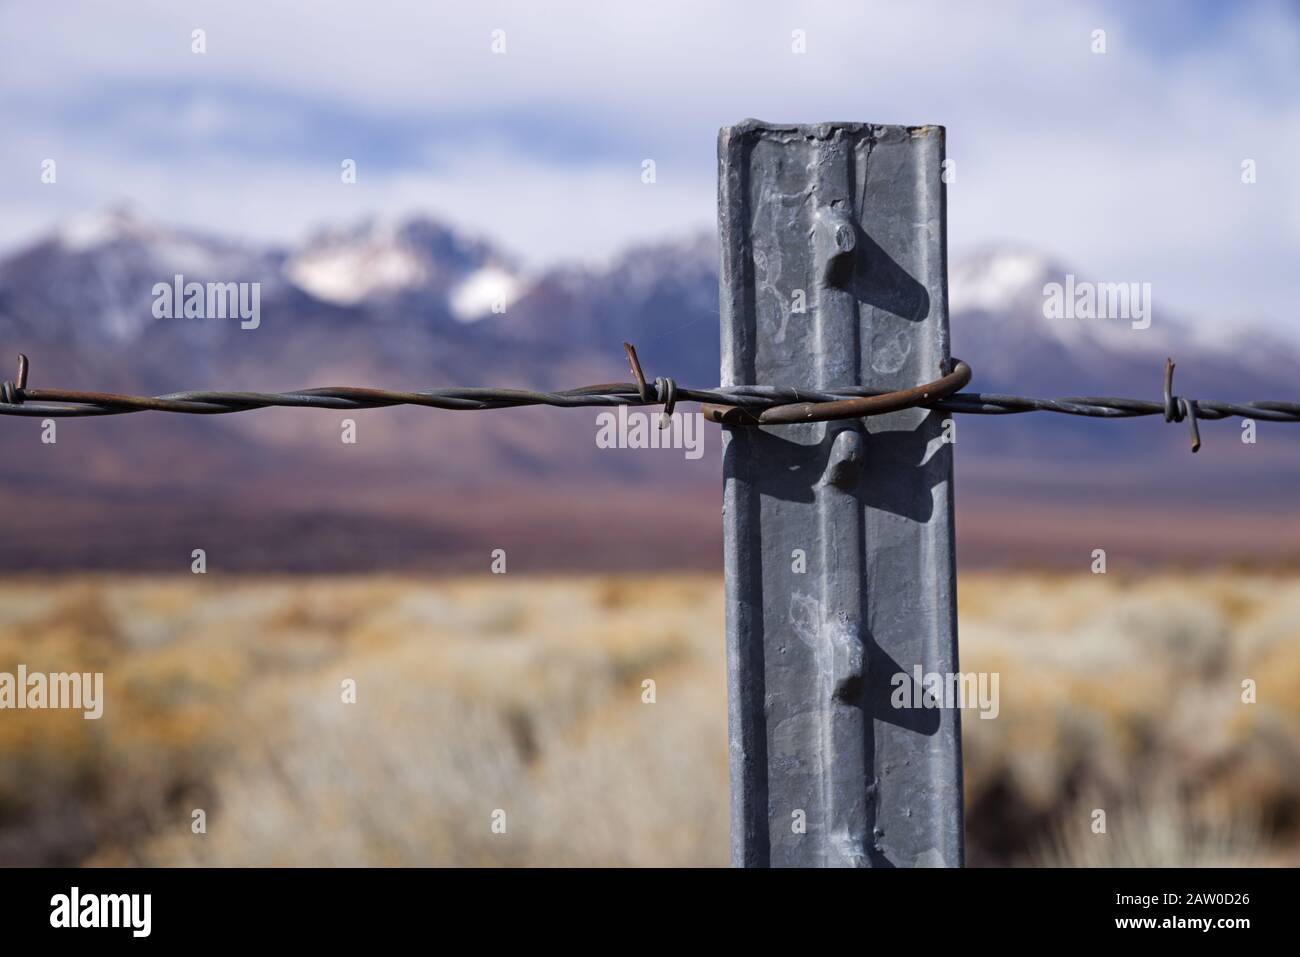 detail of barbed wire fence on metal post with selective focus and defocussed mountains in the distance Stock Photo